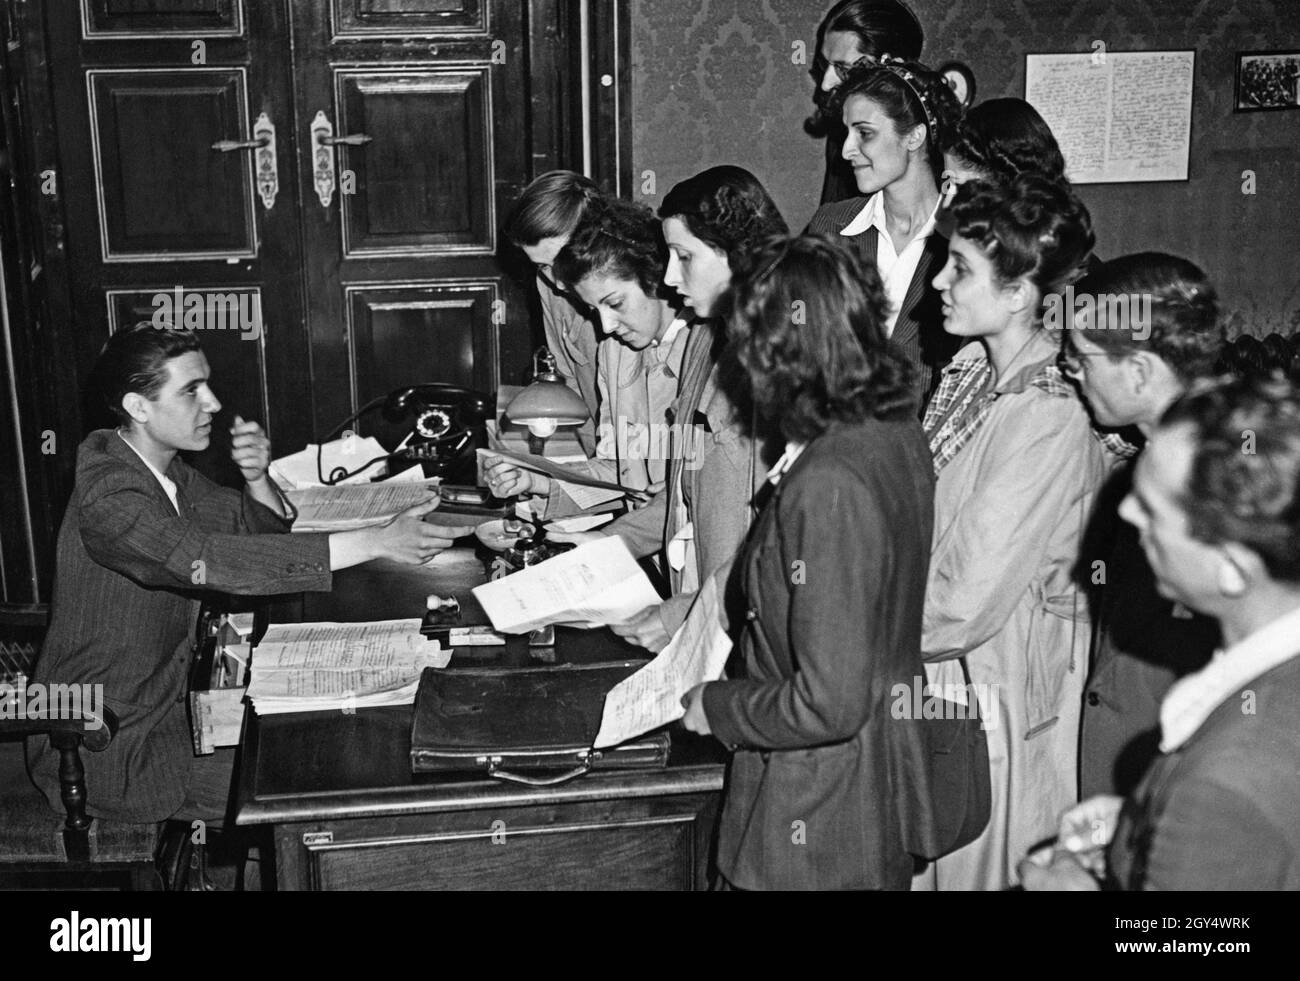 In 1943, labor service was introduced due to increasing labor shortages in the Italian war economy. The picture, taken on July 5 in Milan, shows a registration office for labor service. Numerous women are registering for service. Before the female students were admitted, their suitability for labor service was examined. [automated translation] Stock Photo